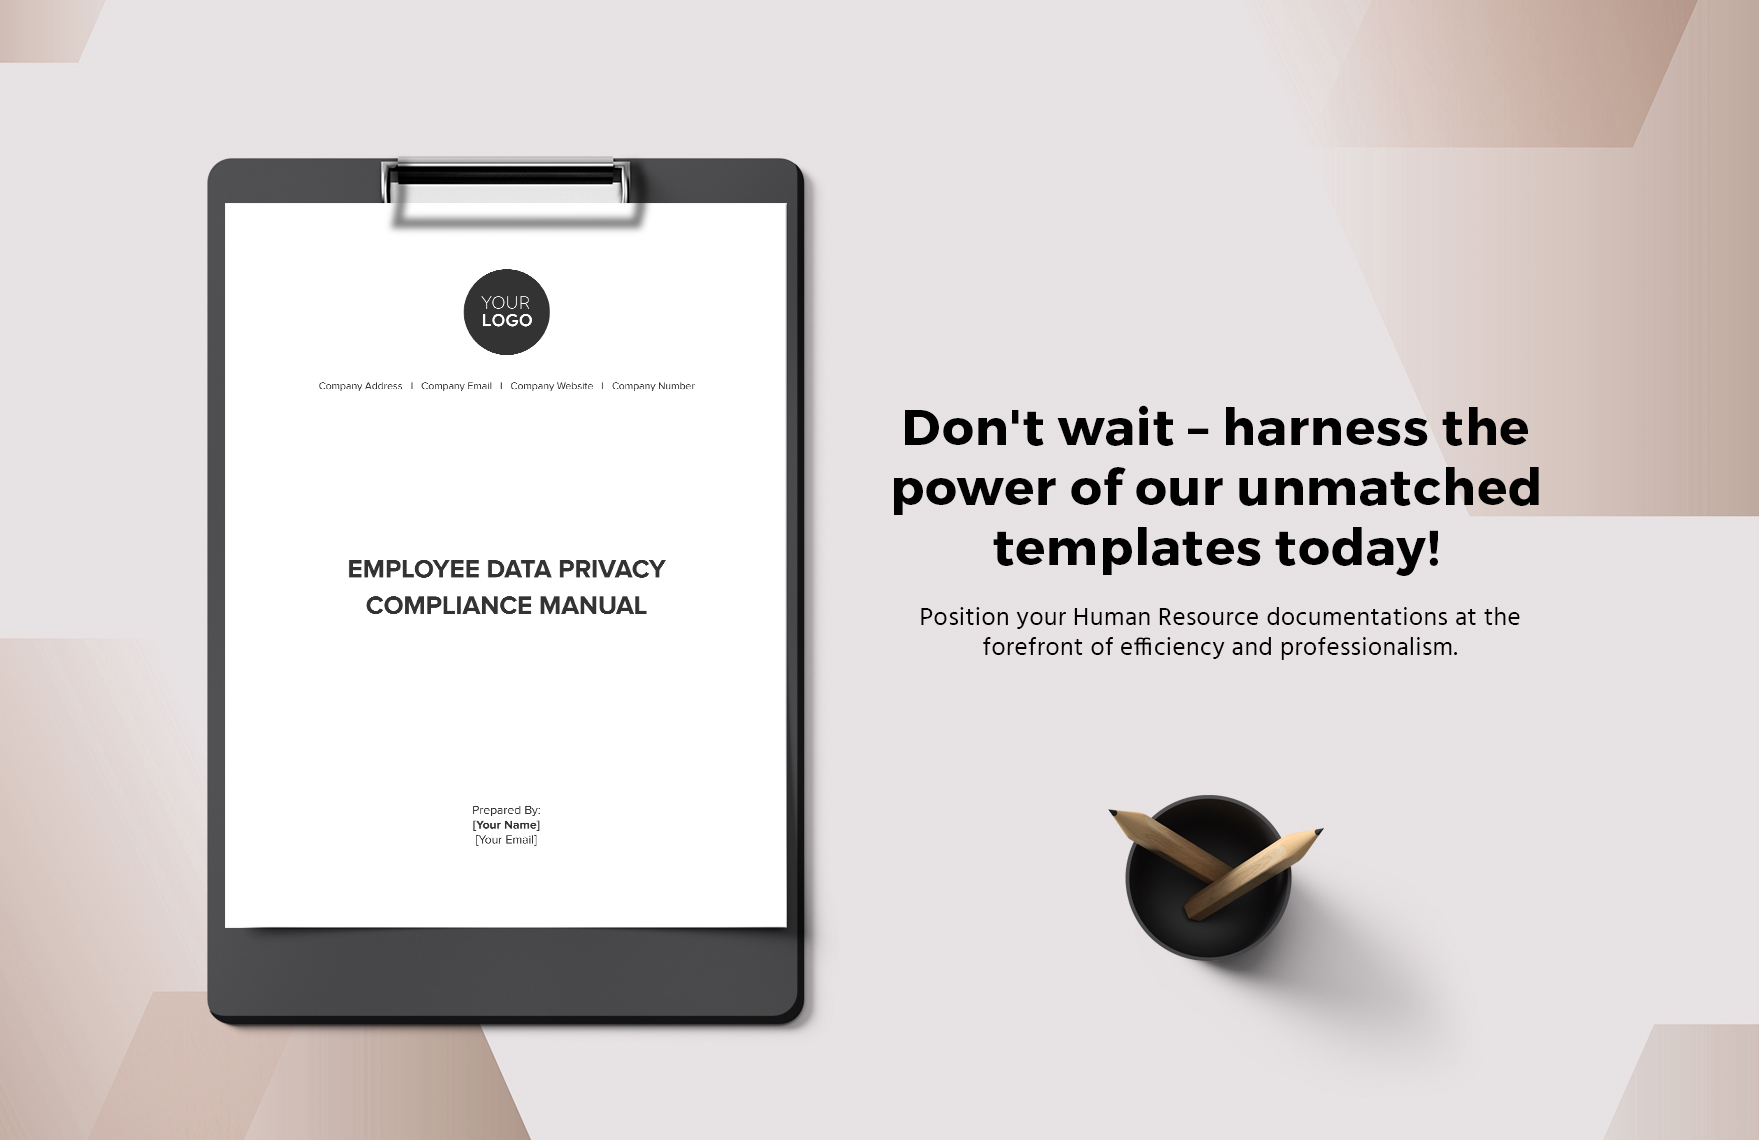 Employee Data Privacy Compliance Manual HR Template